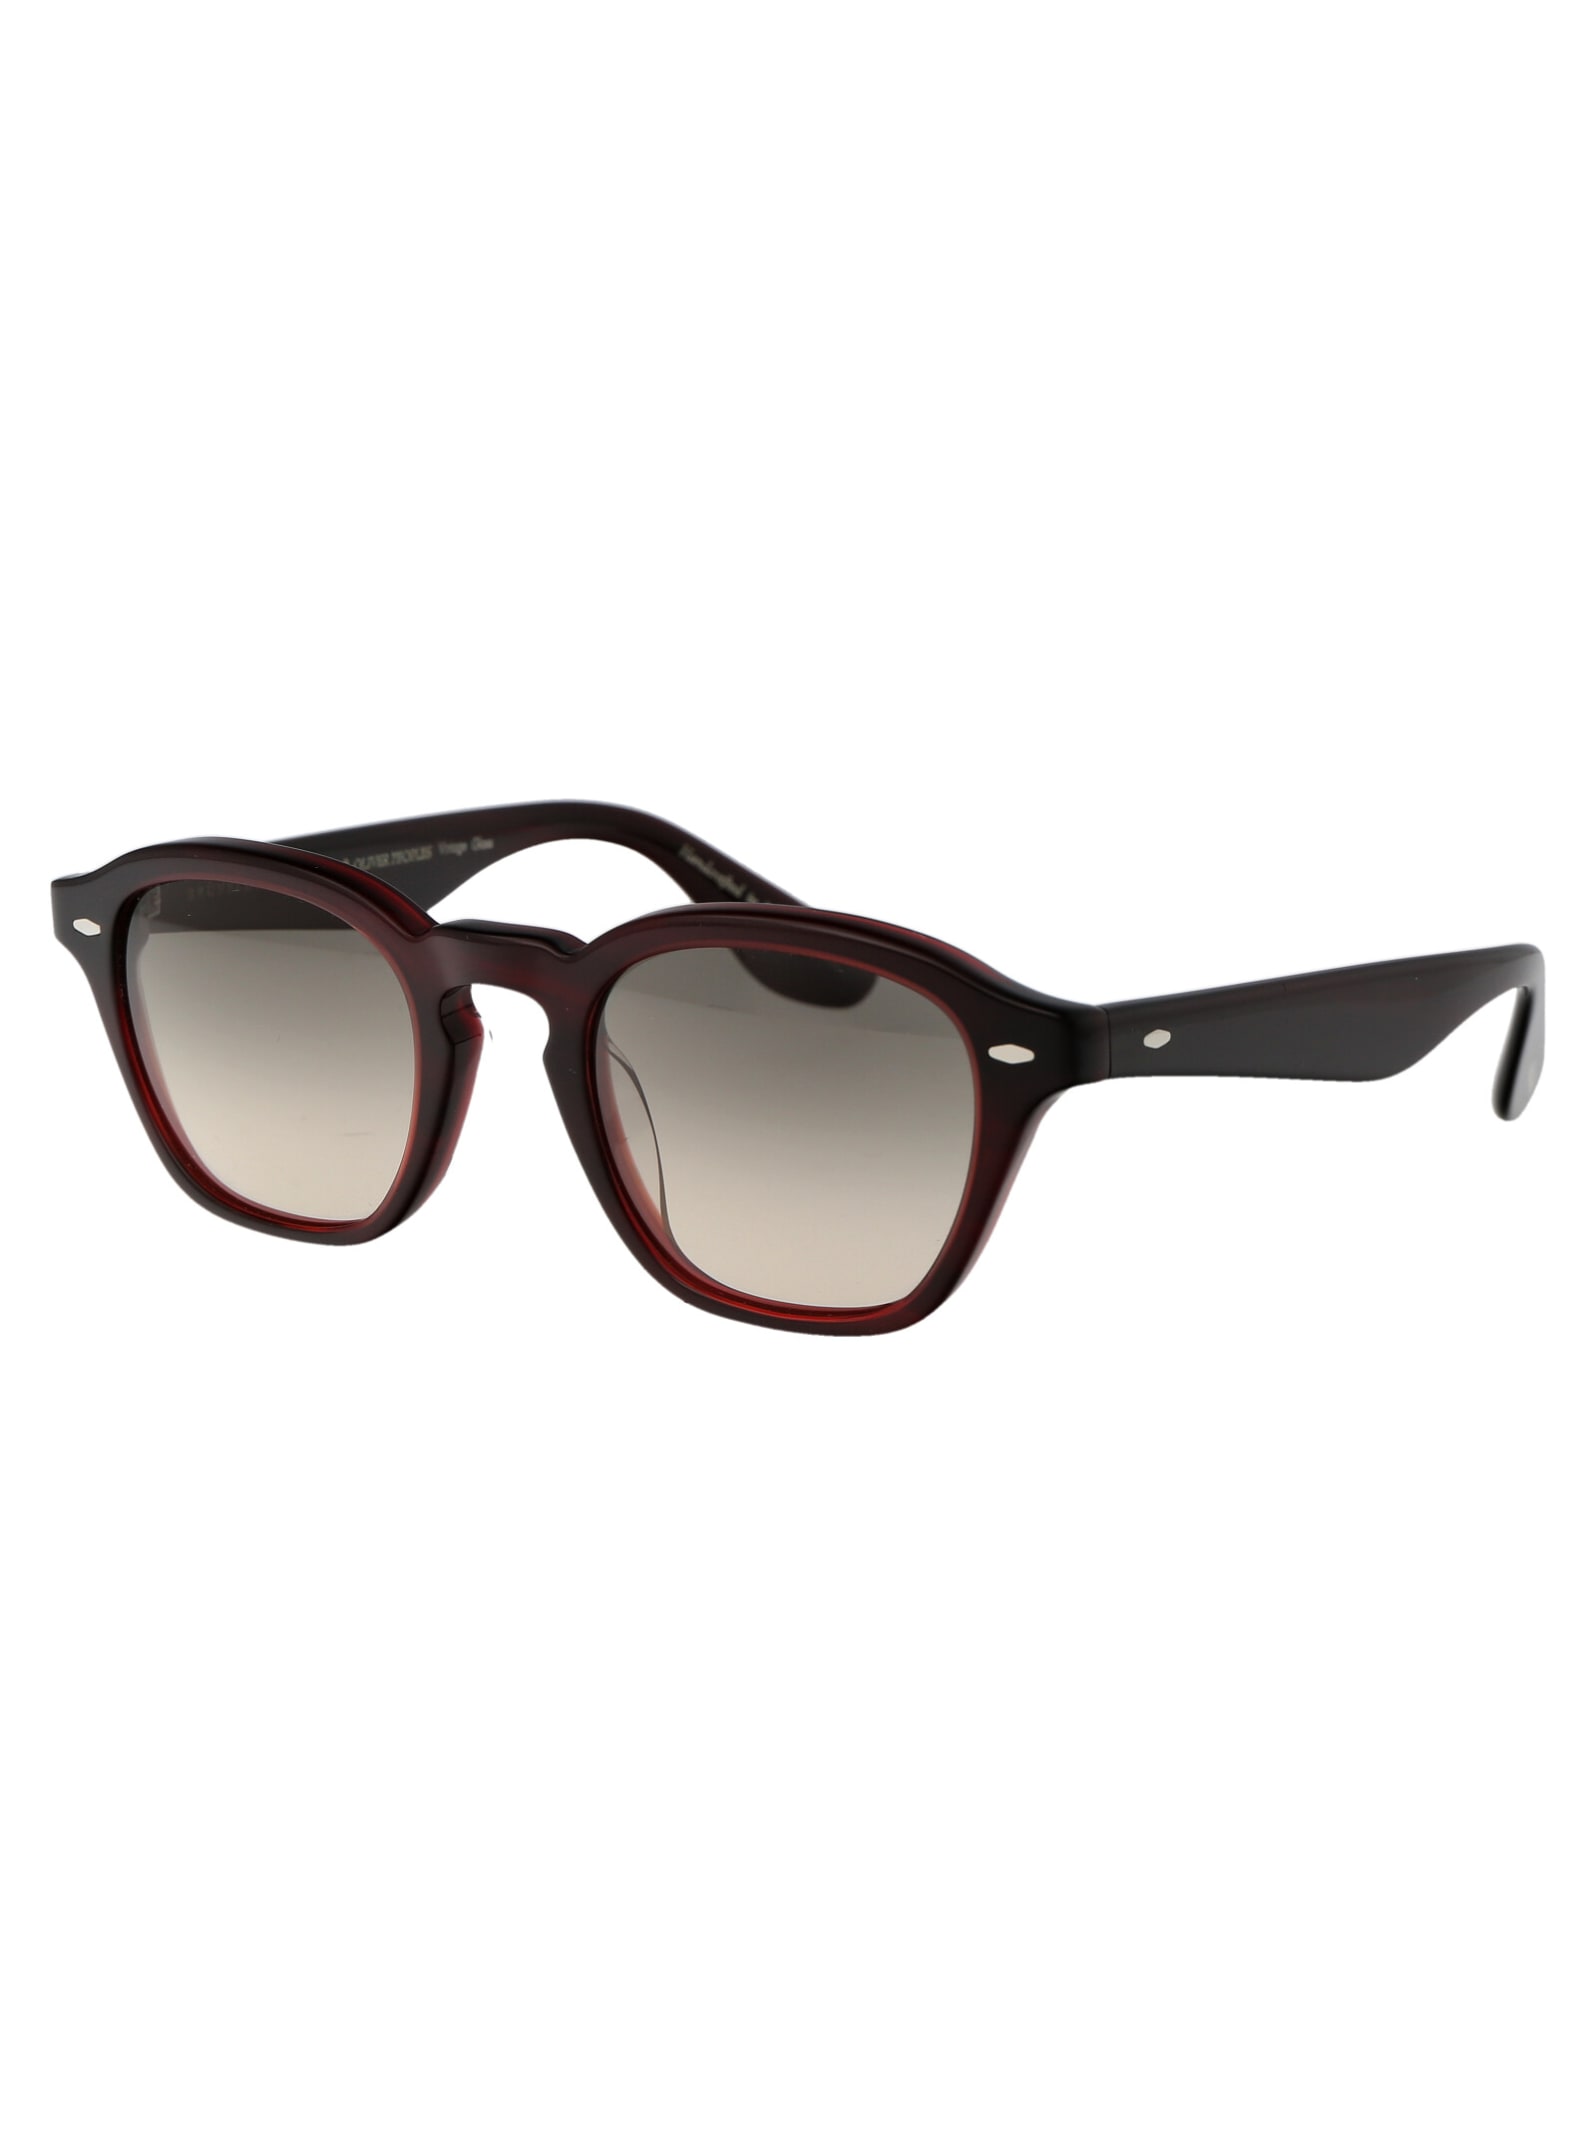 Shop Oliver Peoples Peppe Sunglasses In 167532 Bordeaux Bark